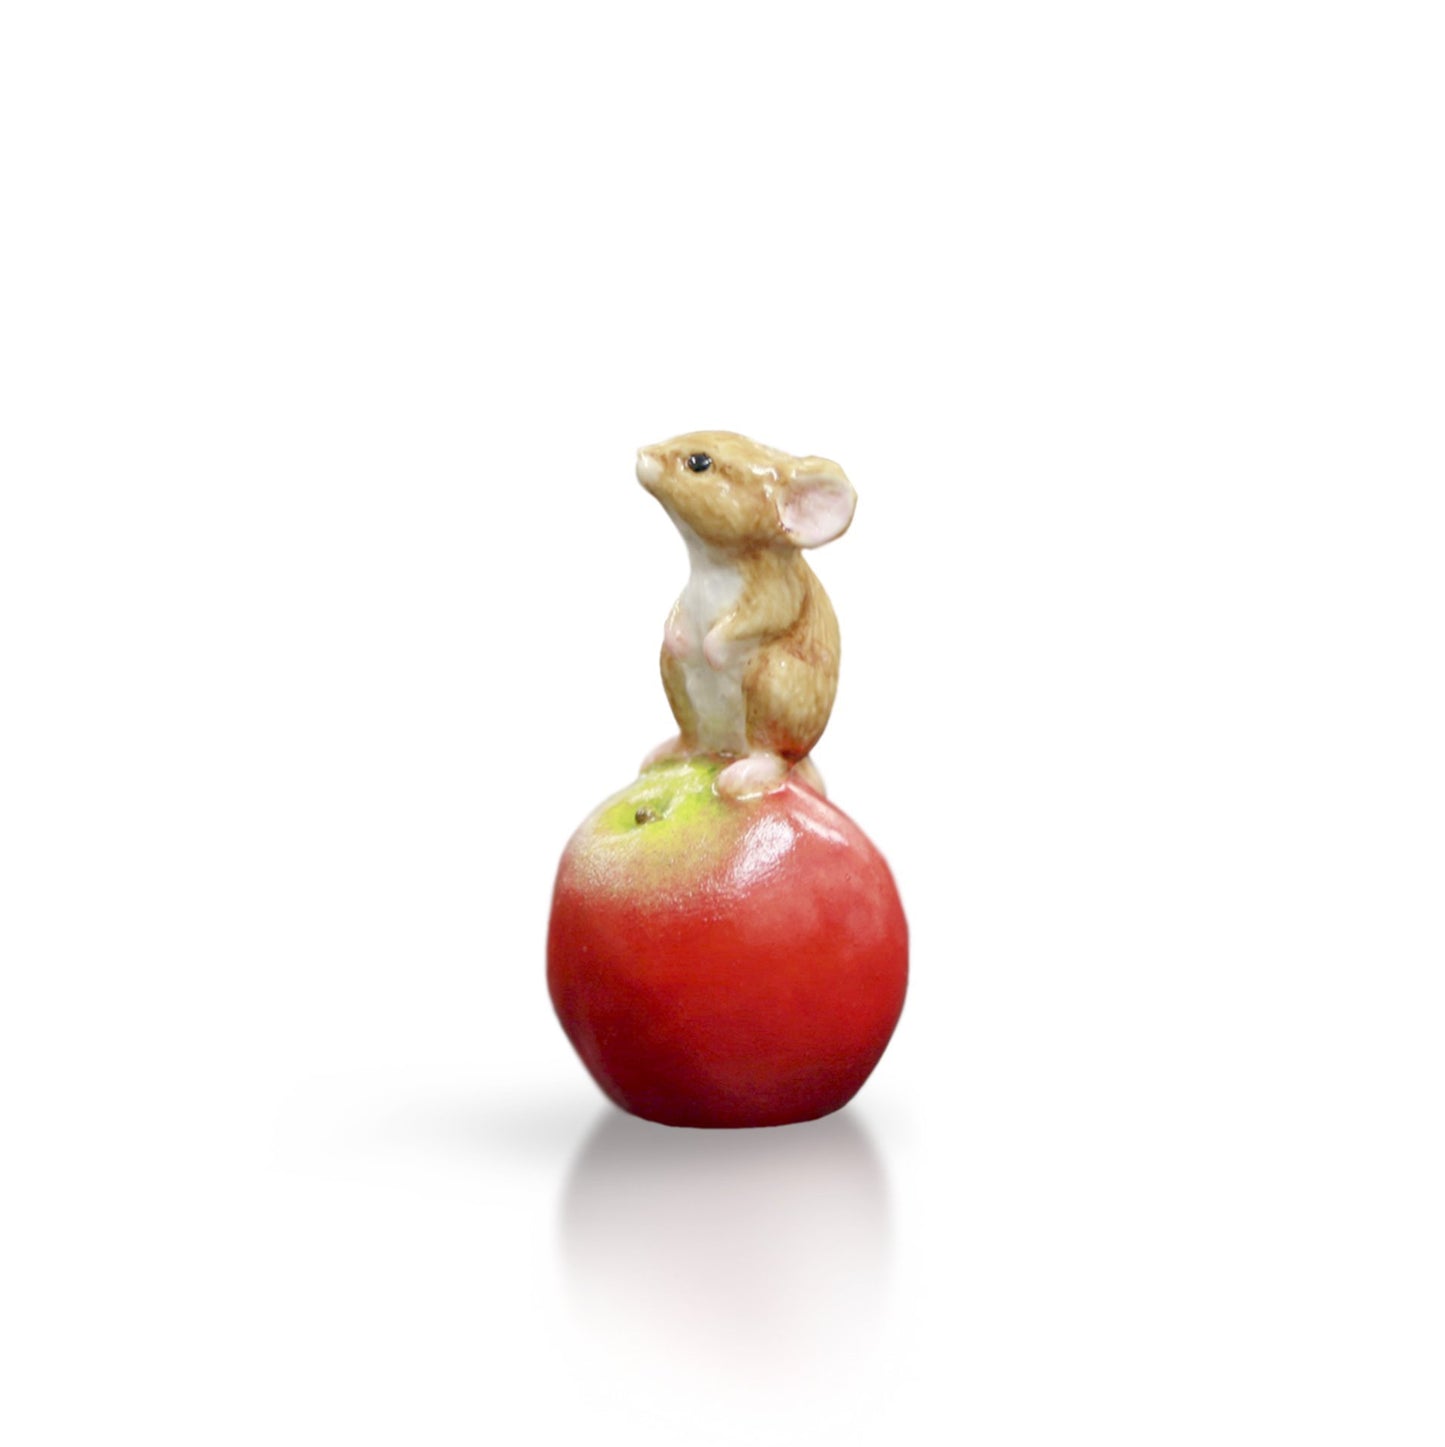 Richard Cooper The Cottage Studio Baby Mouse on Apple by Keith Sherwin